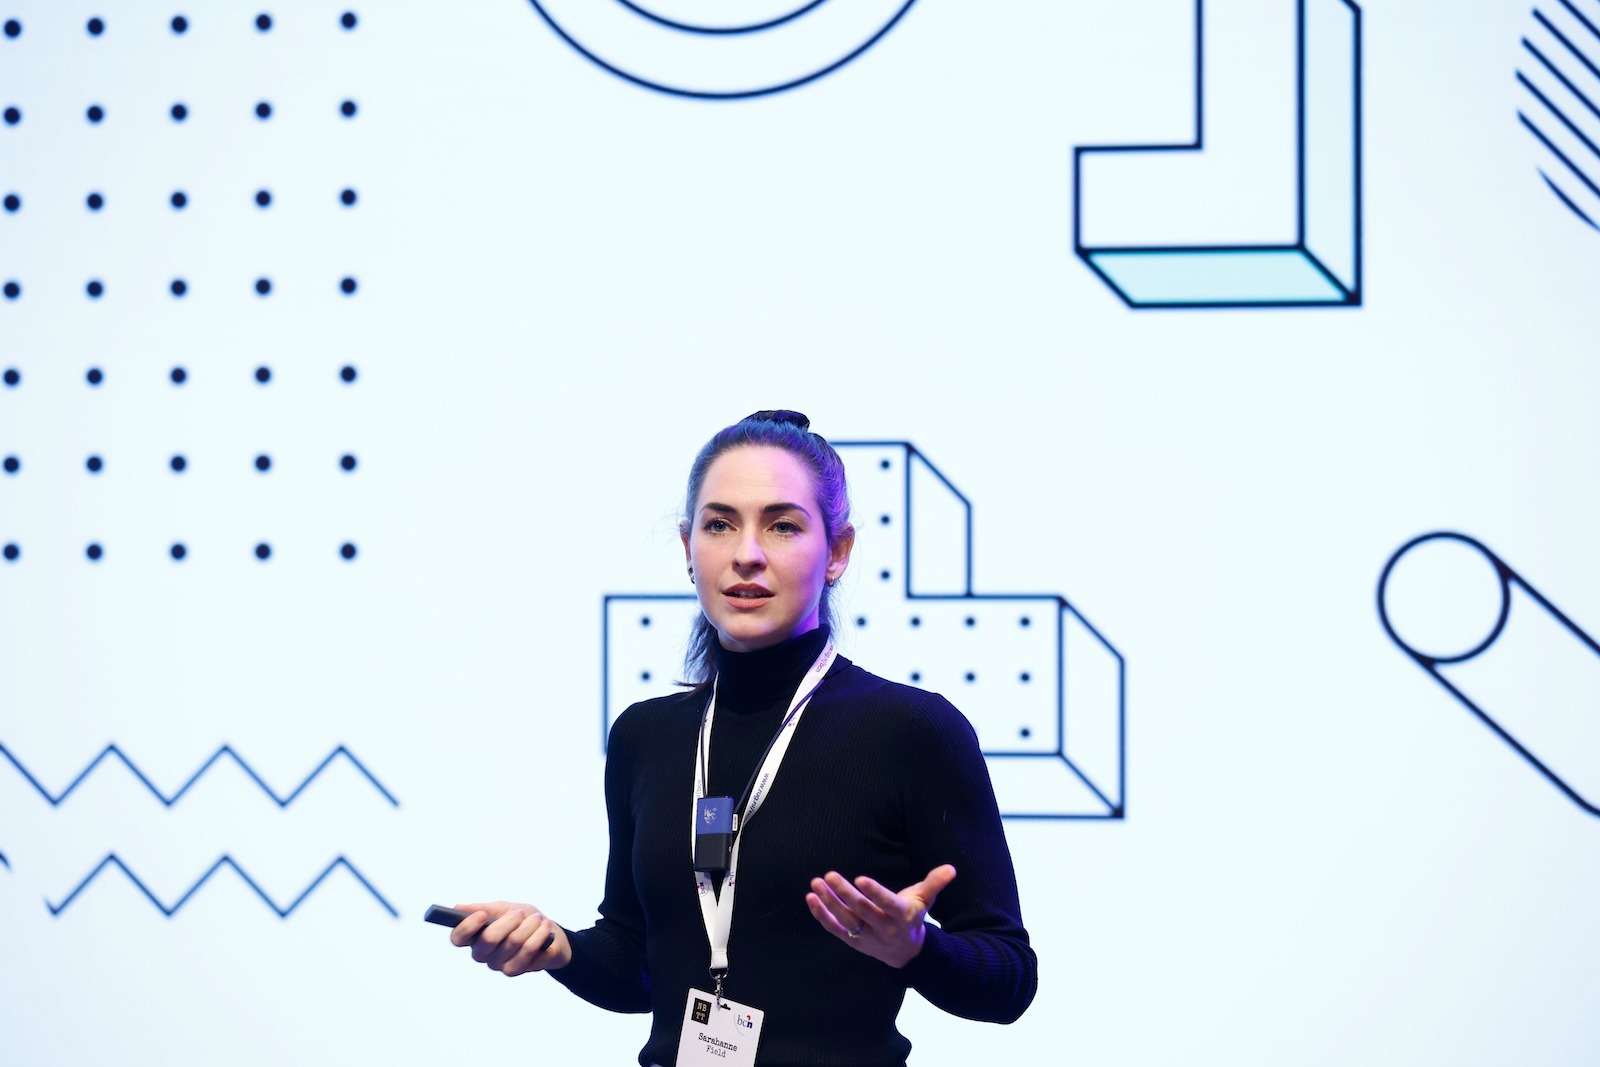 a white woman wearing a black turtleneck wearing a lanyard and a necklace mic gesturing with her hands speaking on a stage with abstract graphics behind her